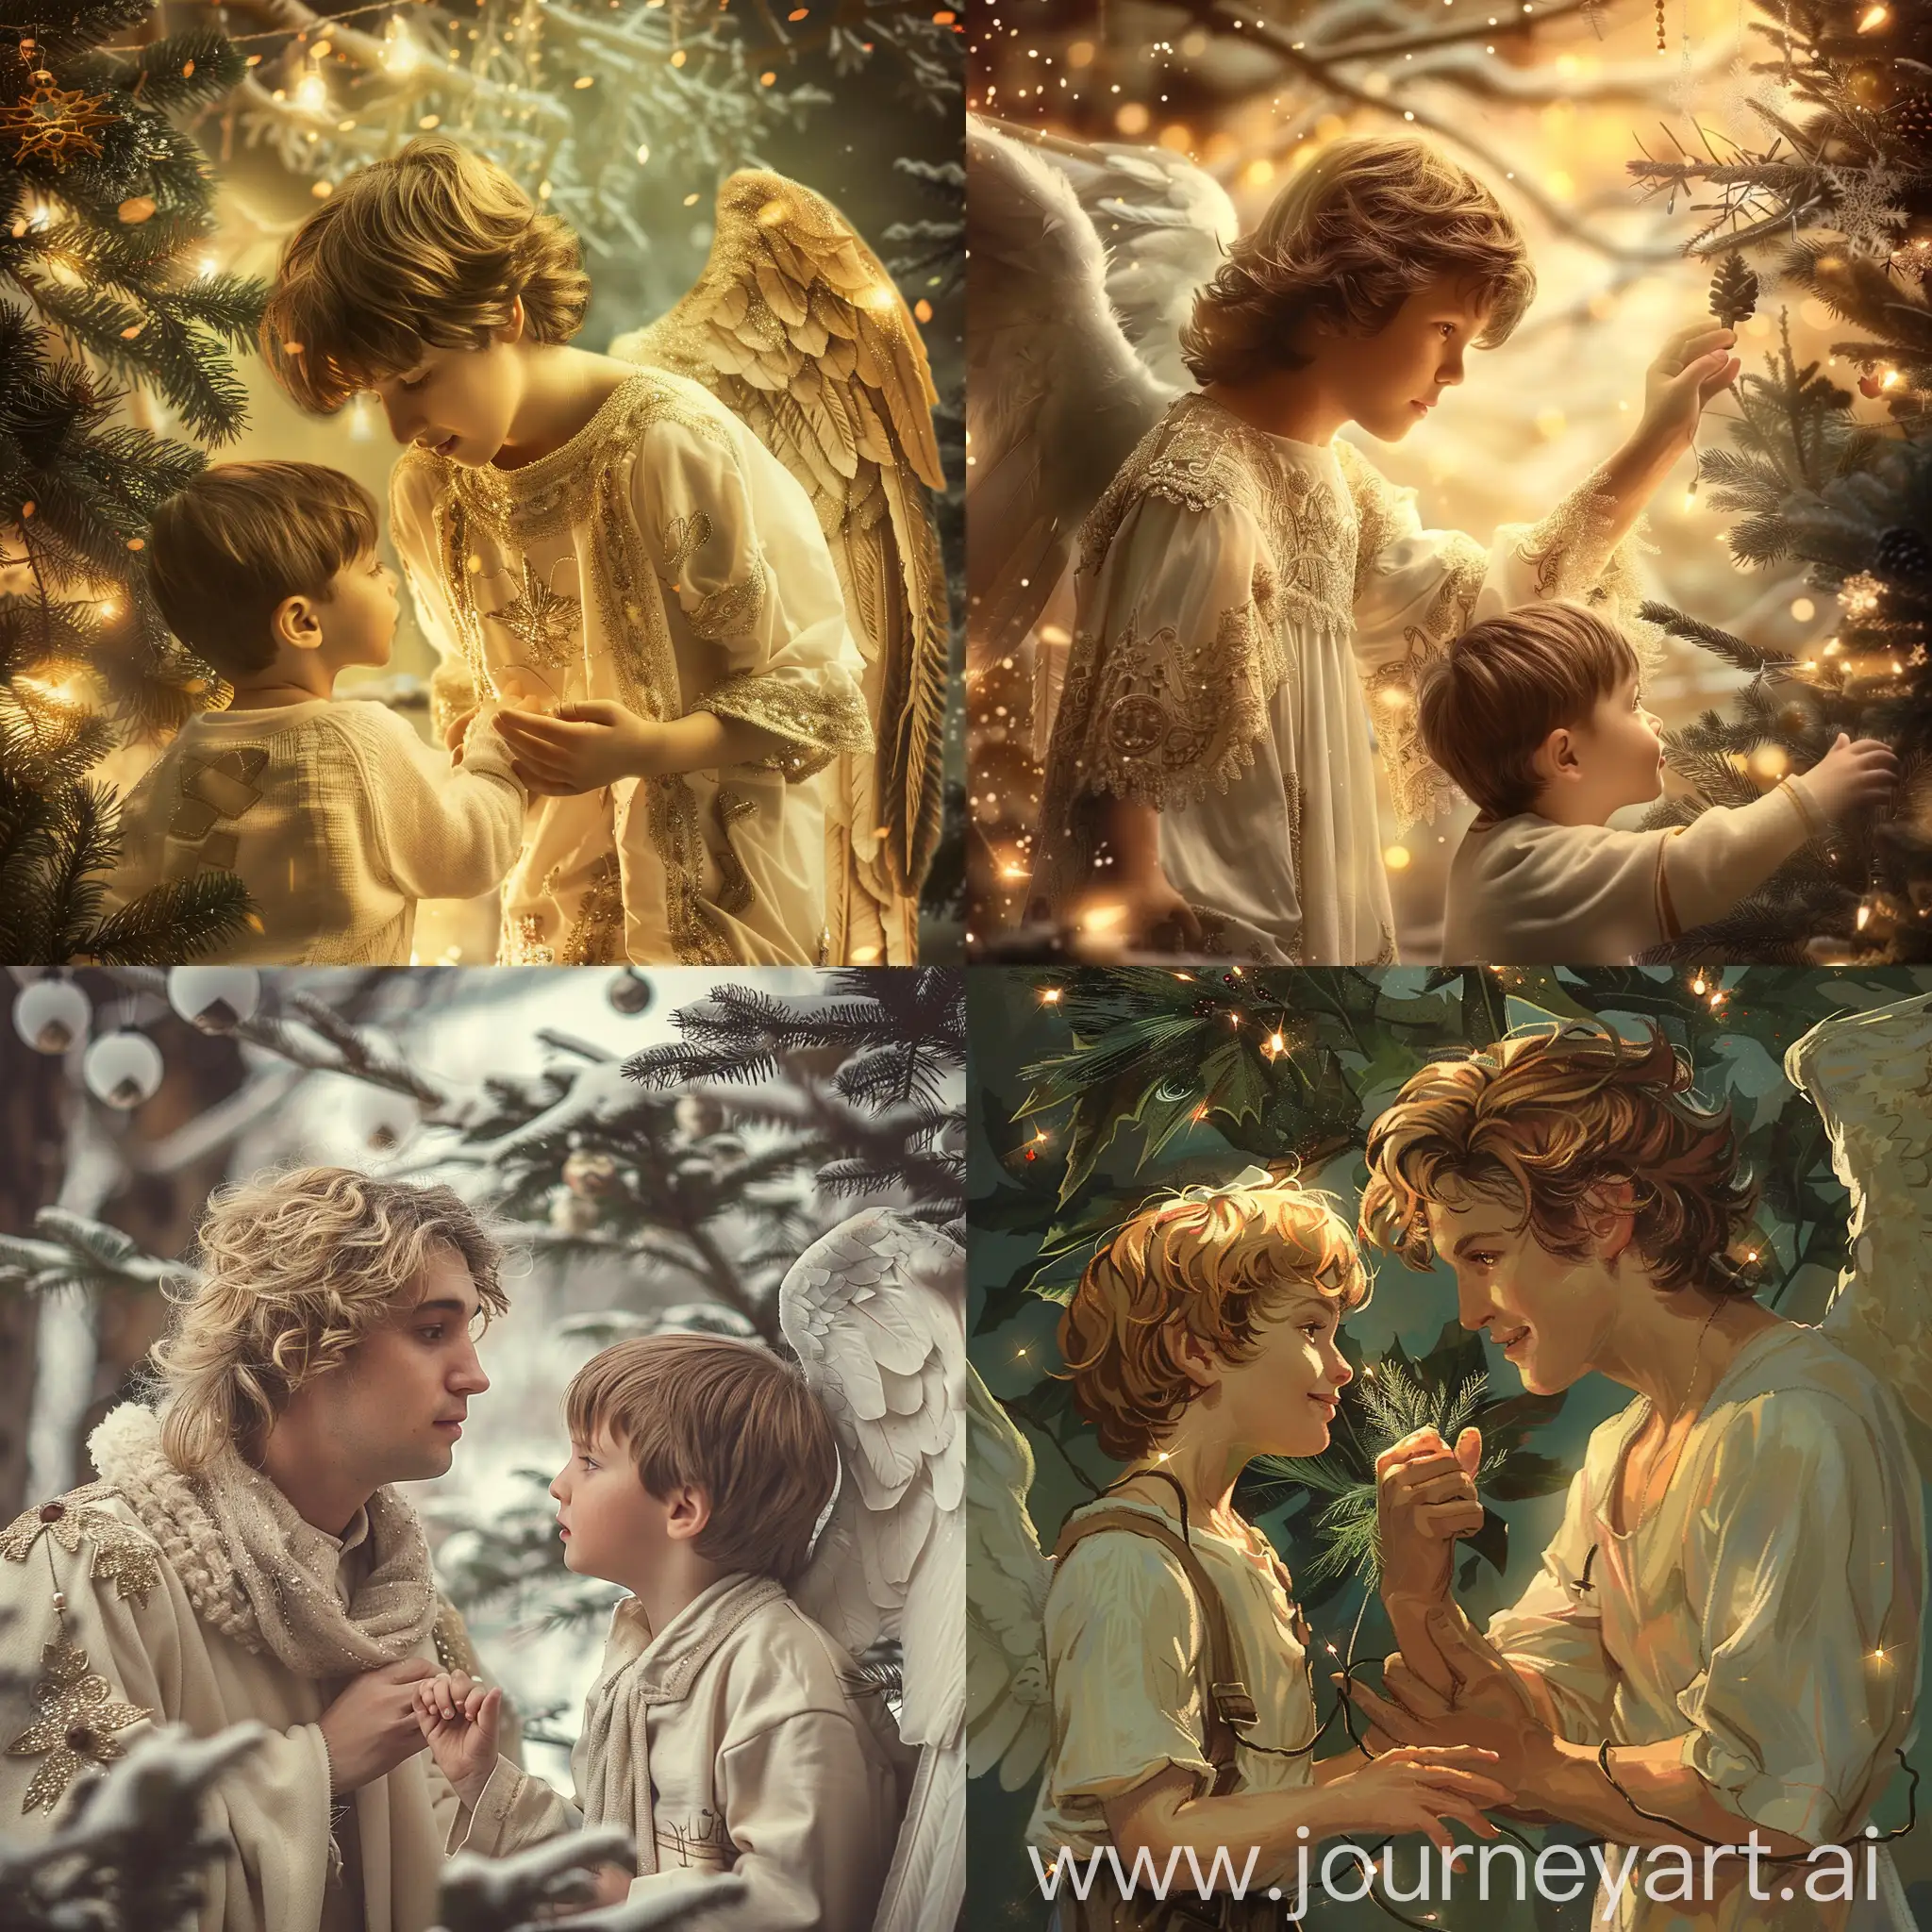 Cherubic-Adult-Male-Angel-Inspires-Admiration-in-Little-Boy-by-the-New-Year-Tree